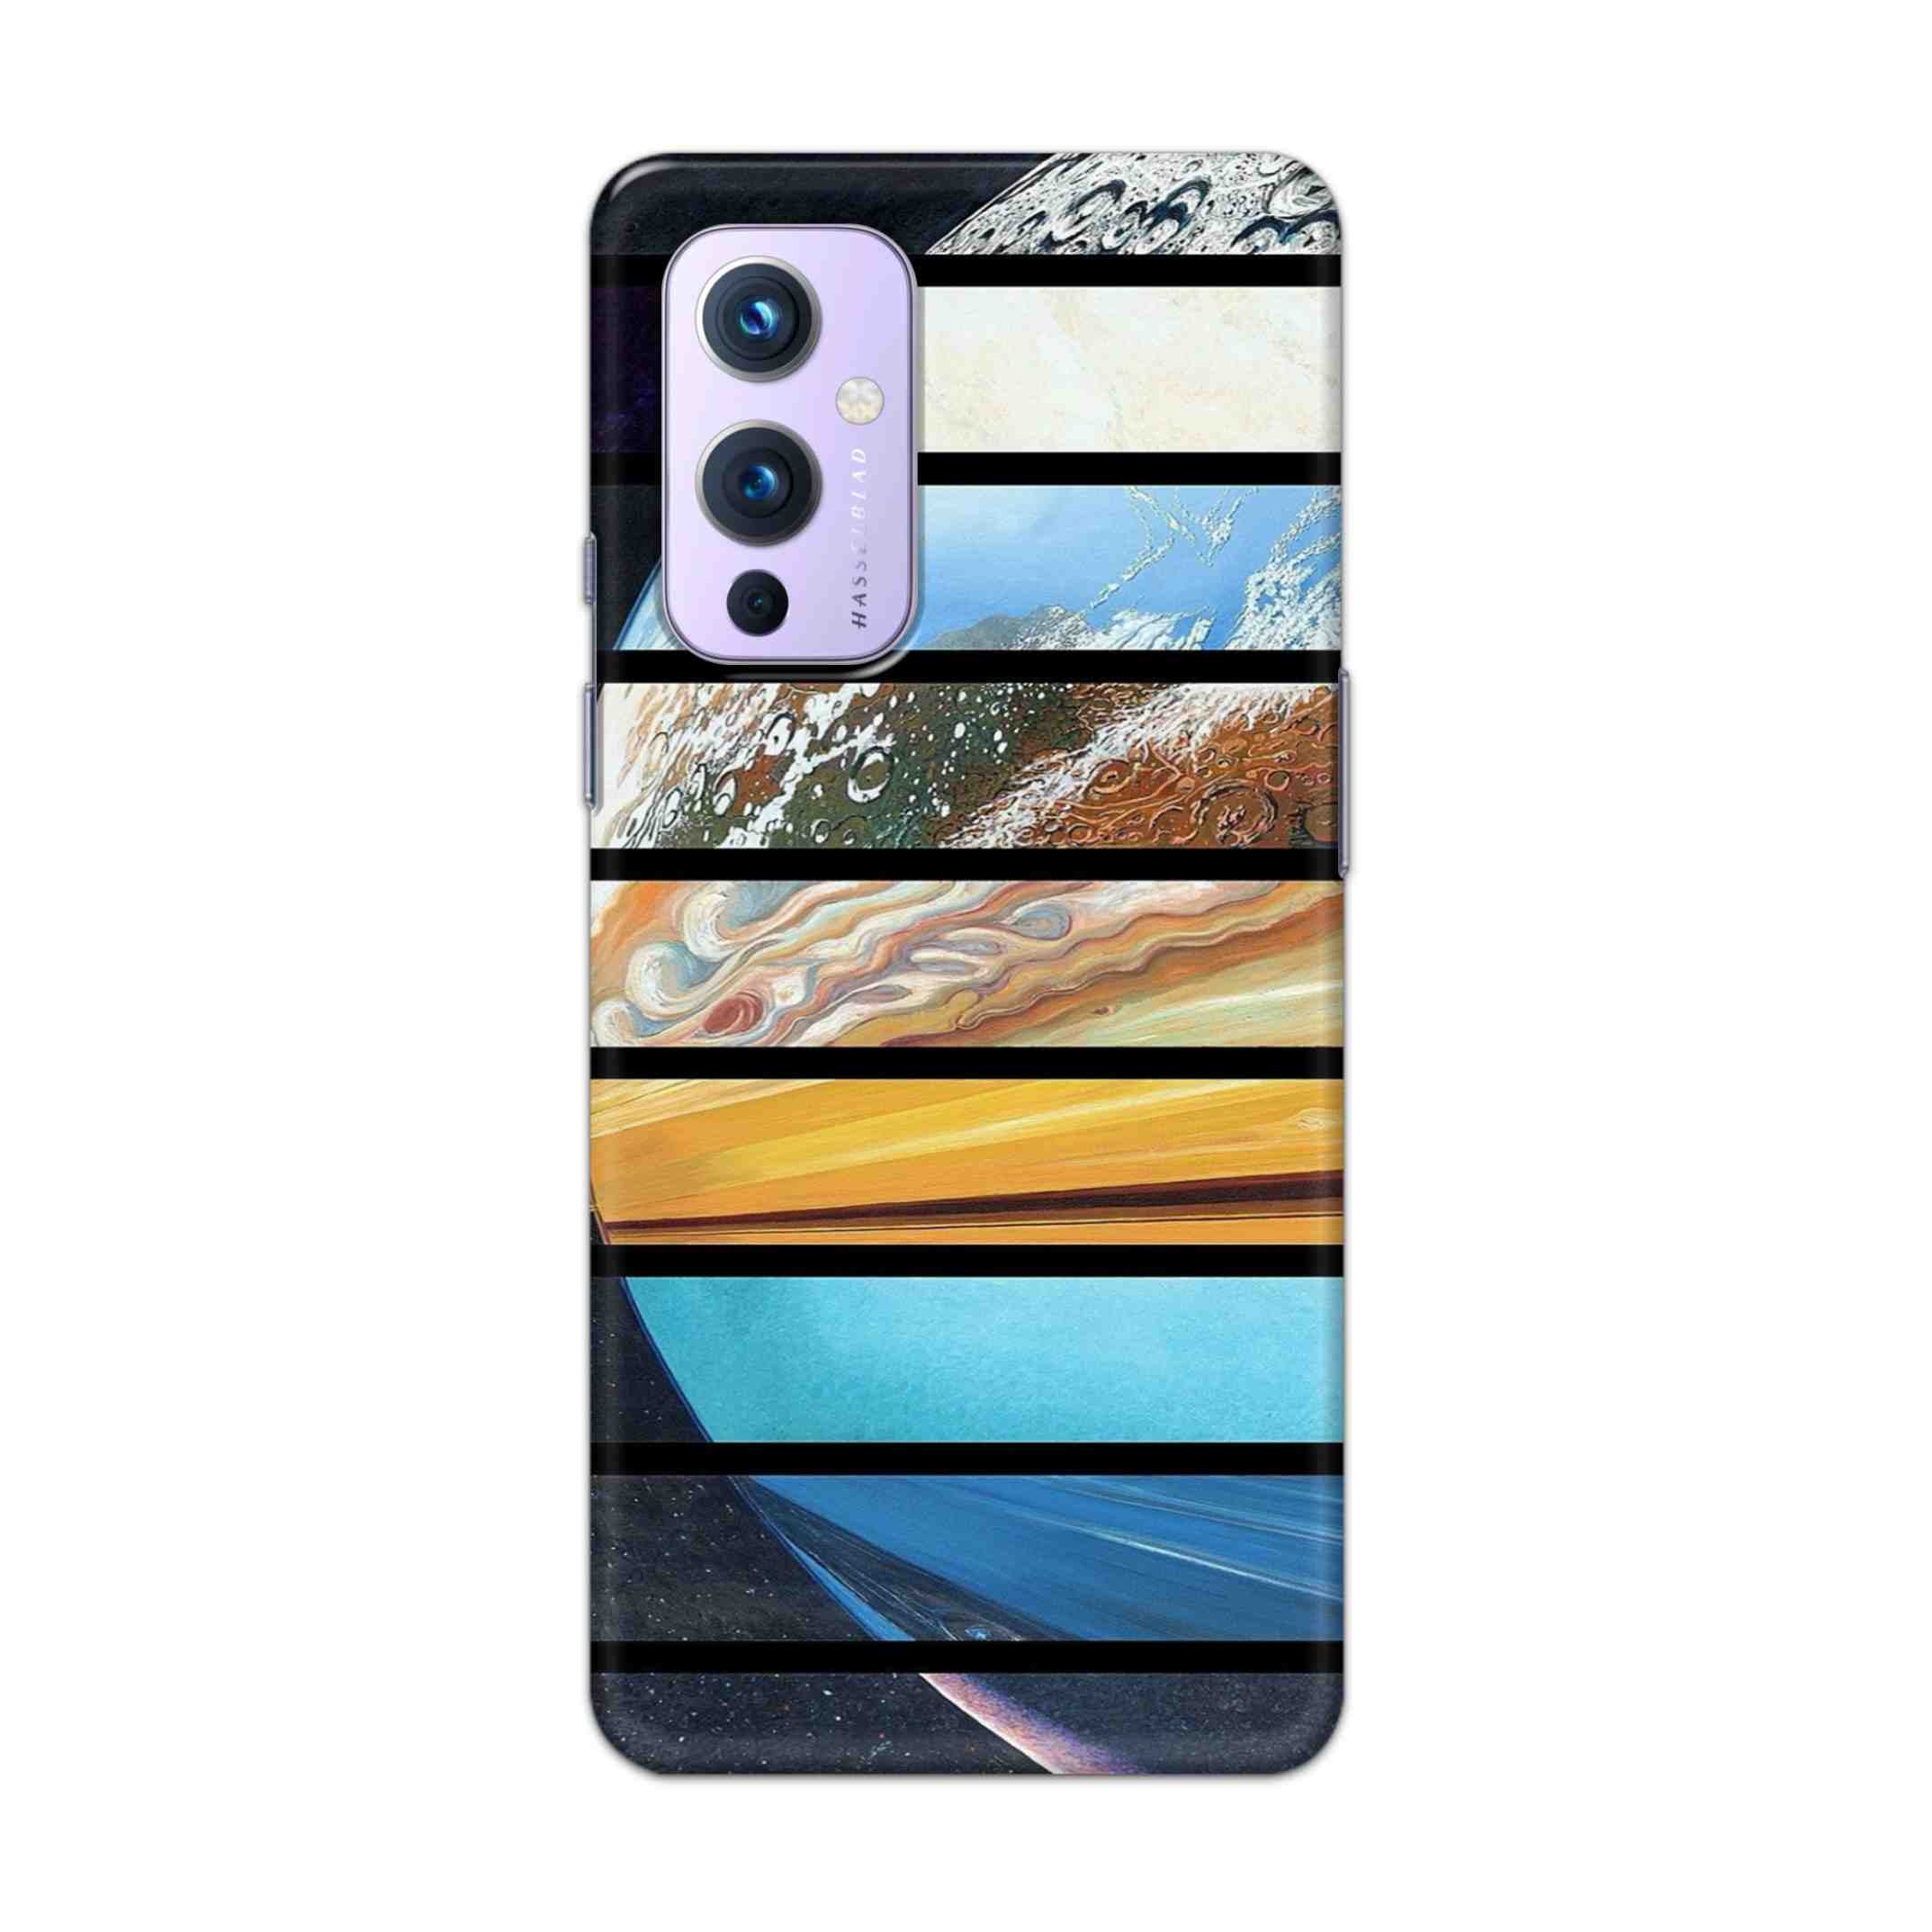 Buy Colourful Earth Hard Back Mobile Phone Case Cover For OnePlus 9 Online